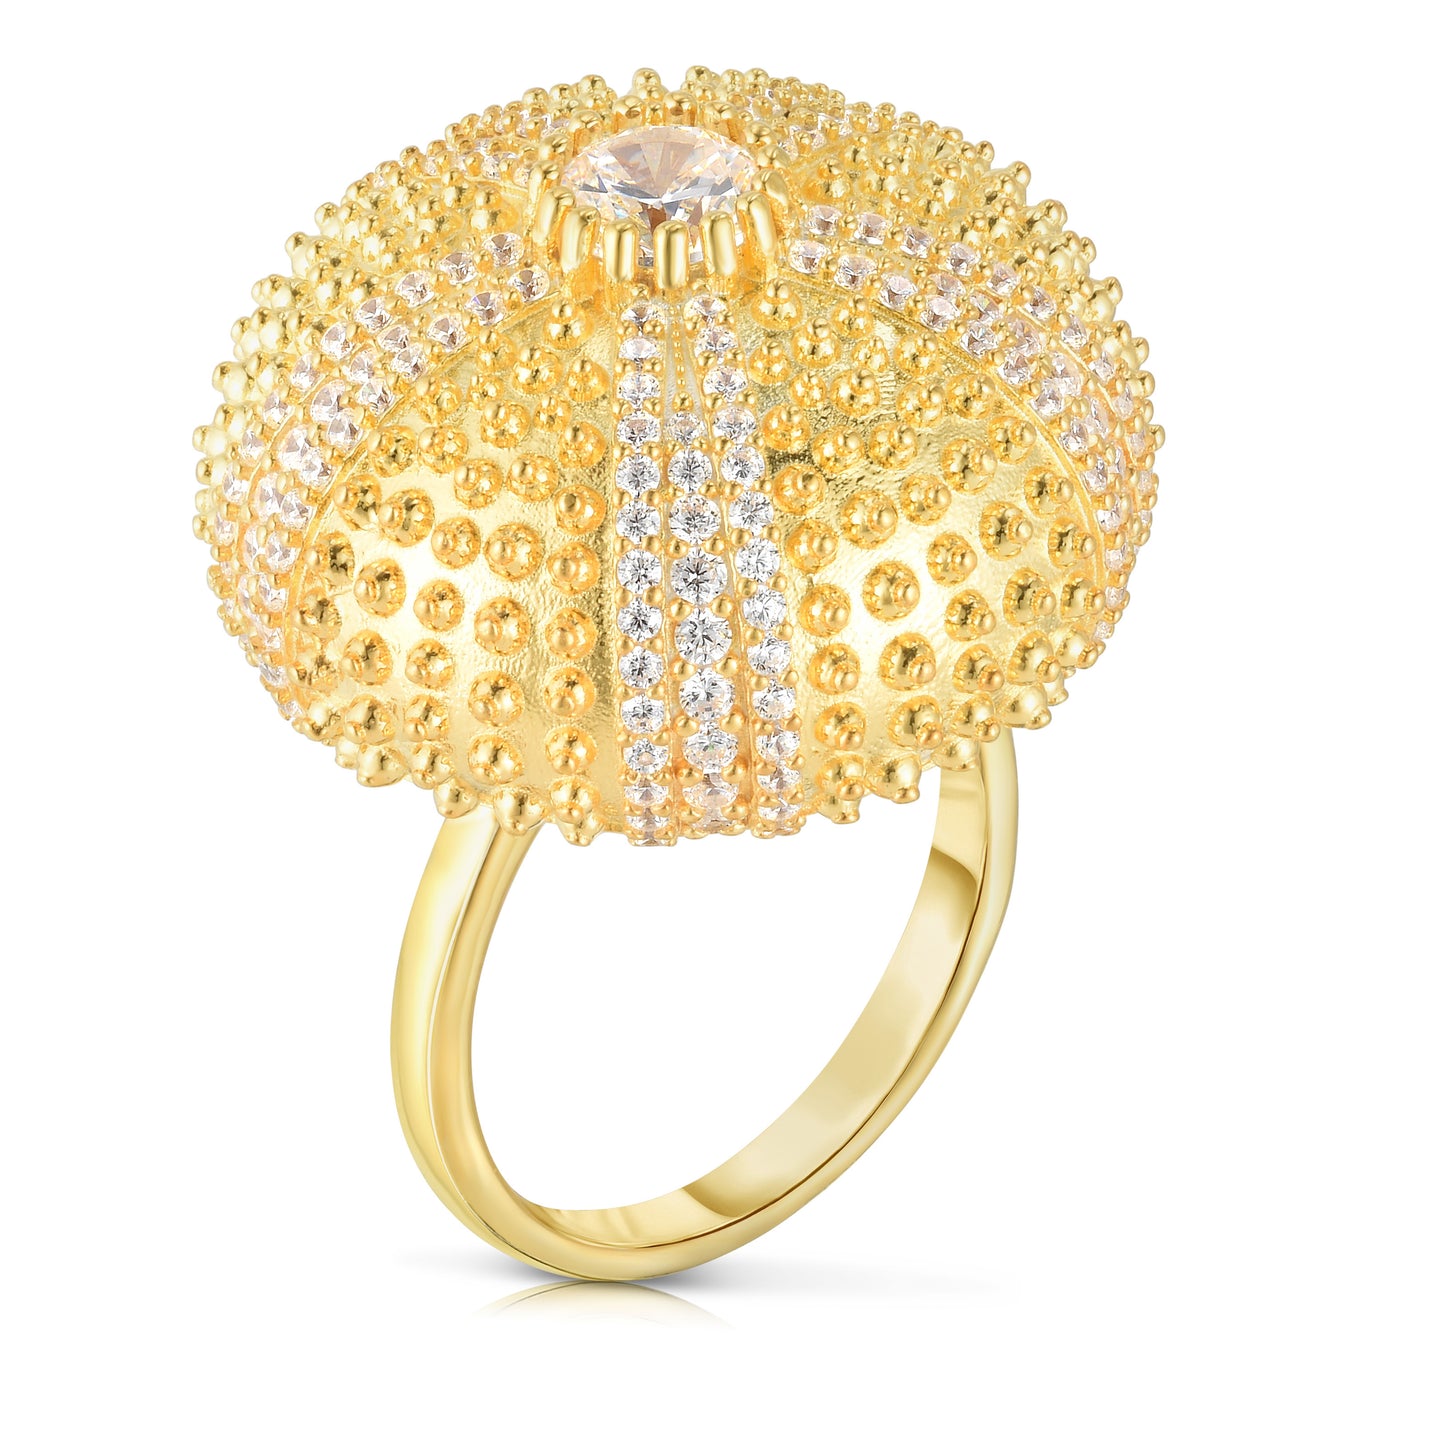 Sea Urchin Cocktail Ring